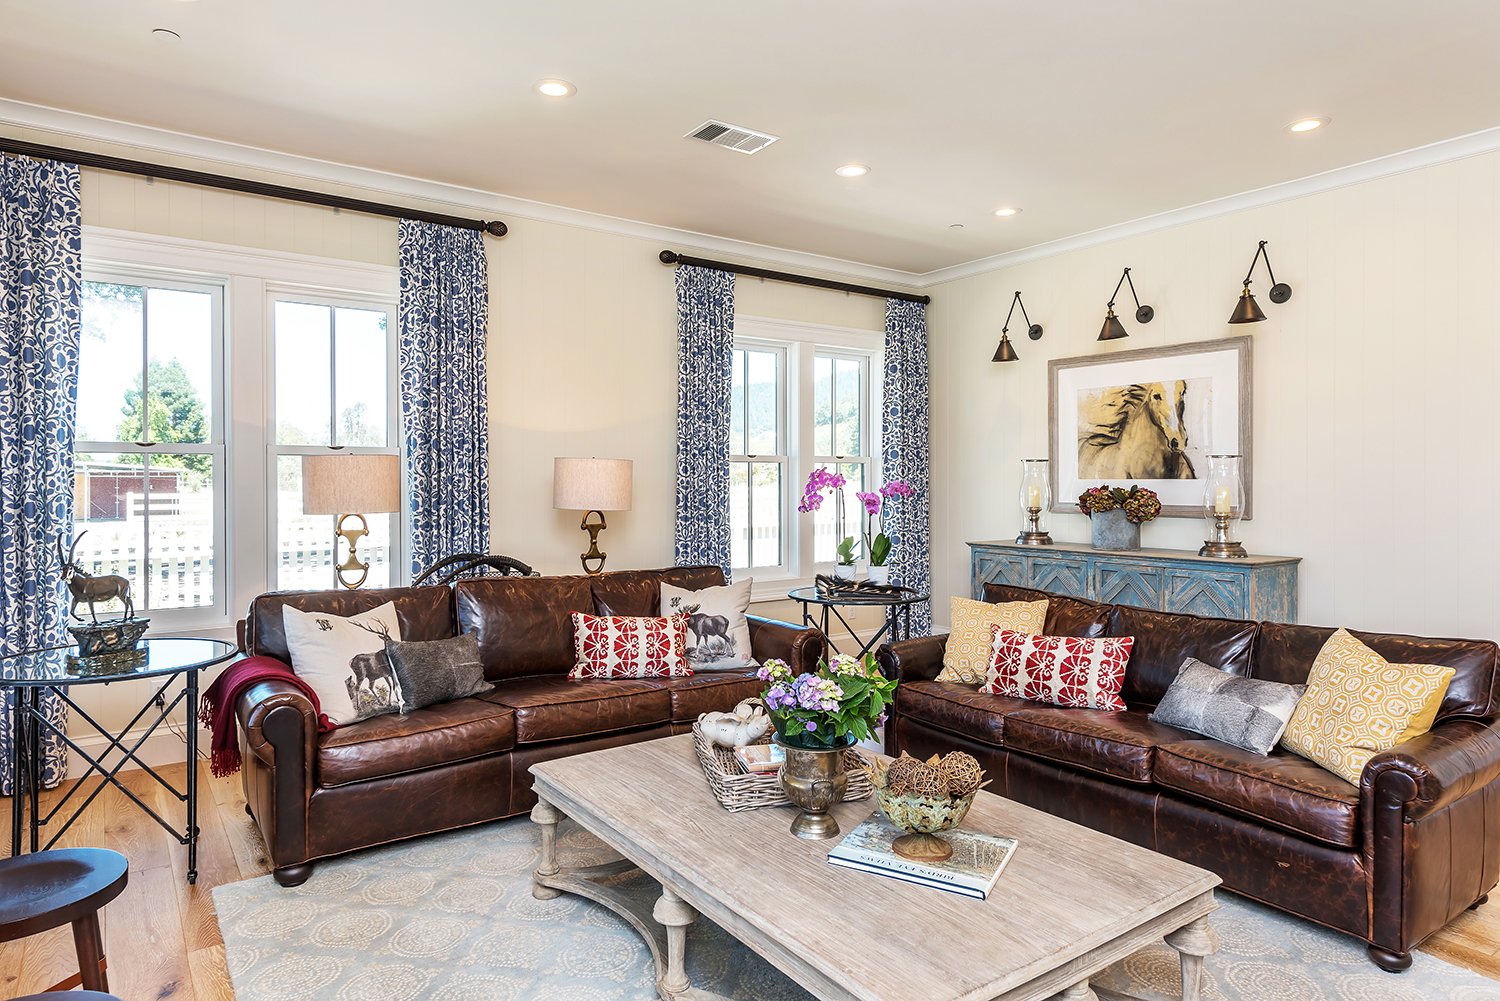  A living area with blue patterned curtains, a curated mantle, large coffee table, and two leather couches.  